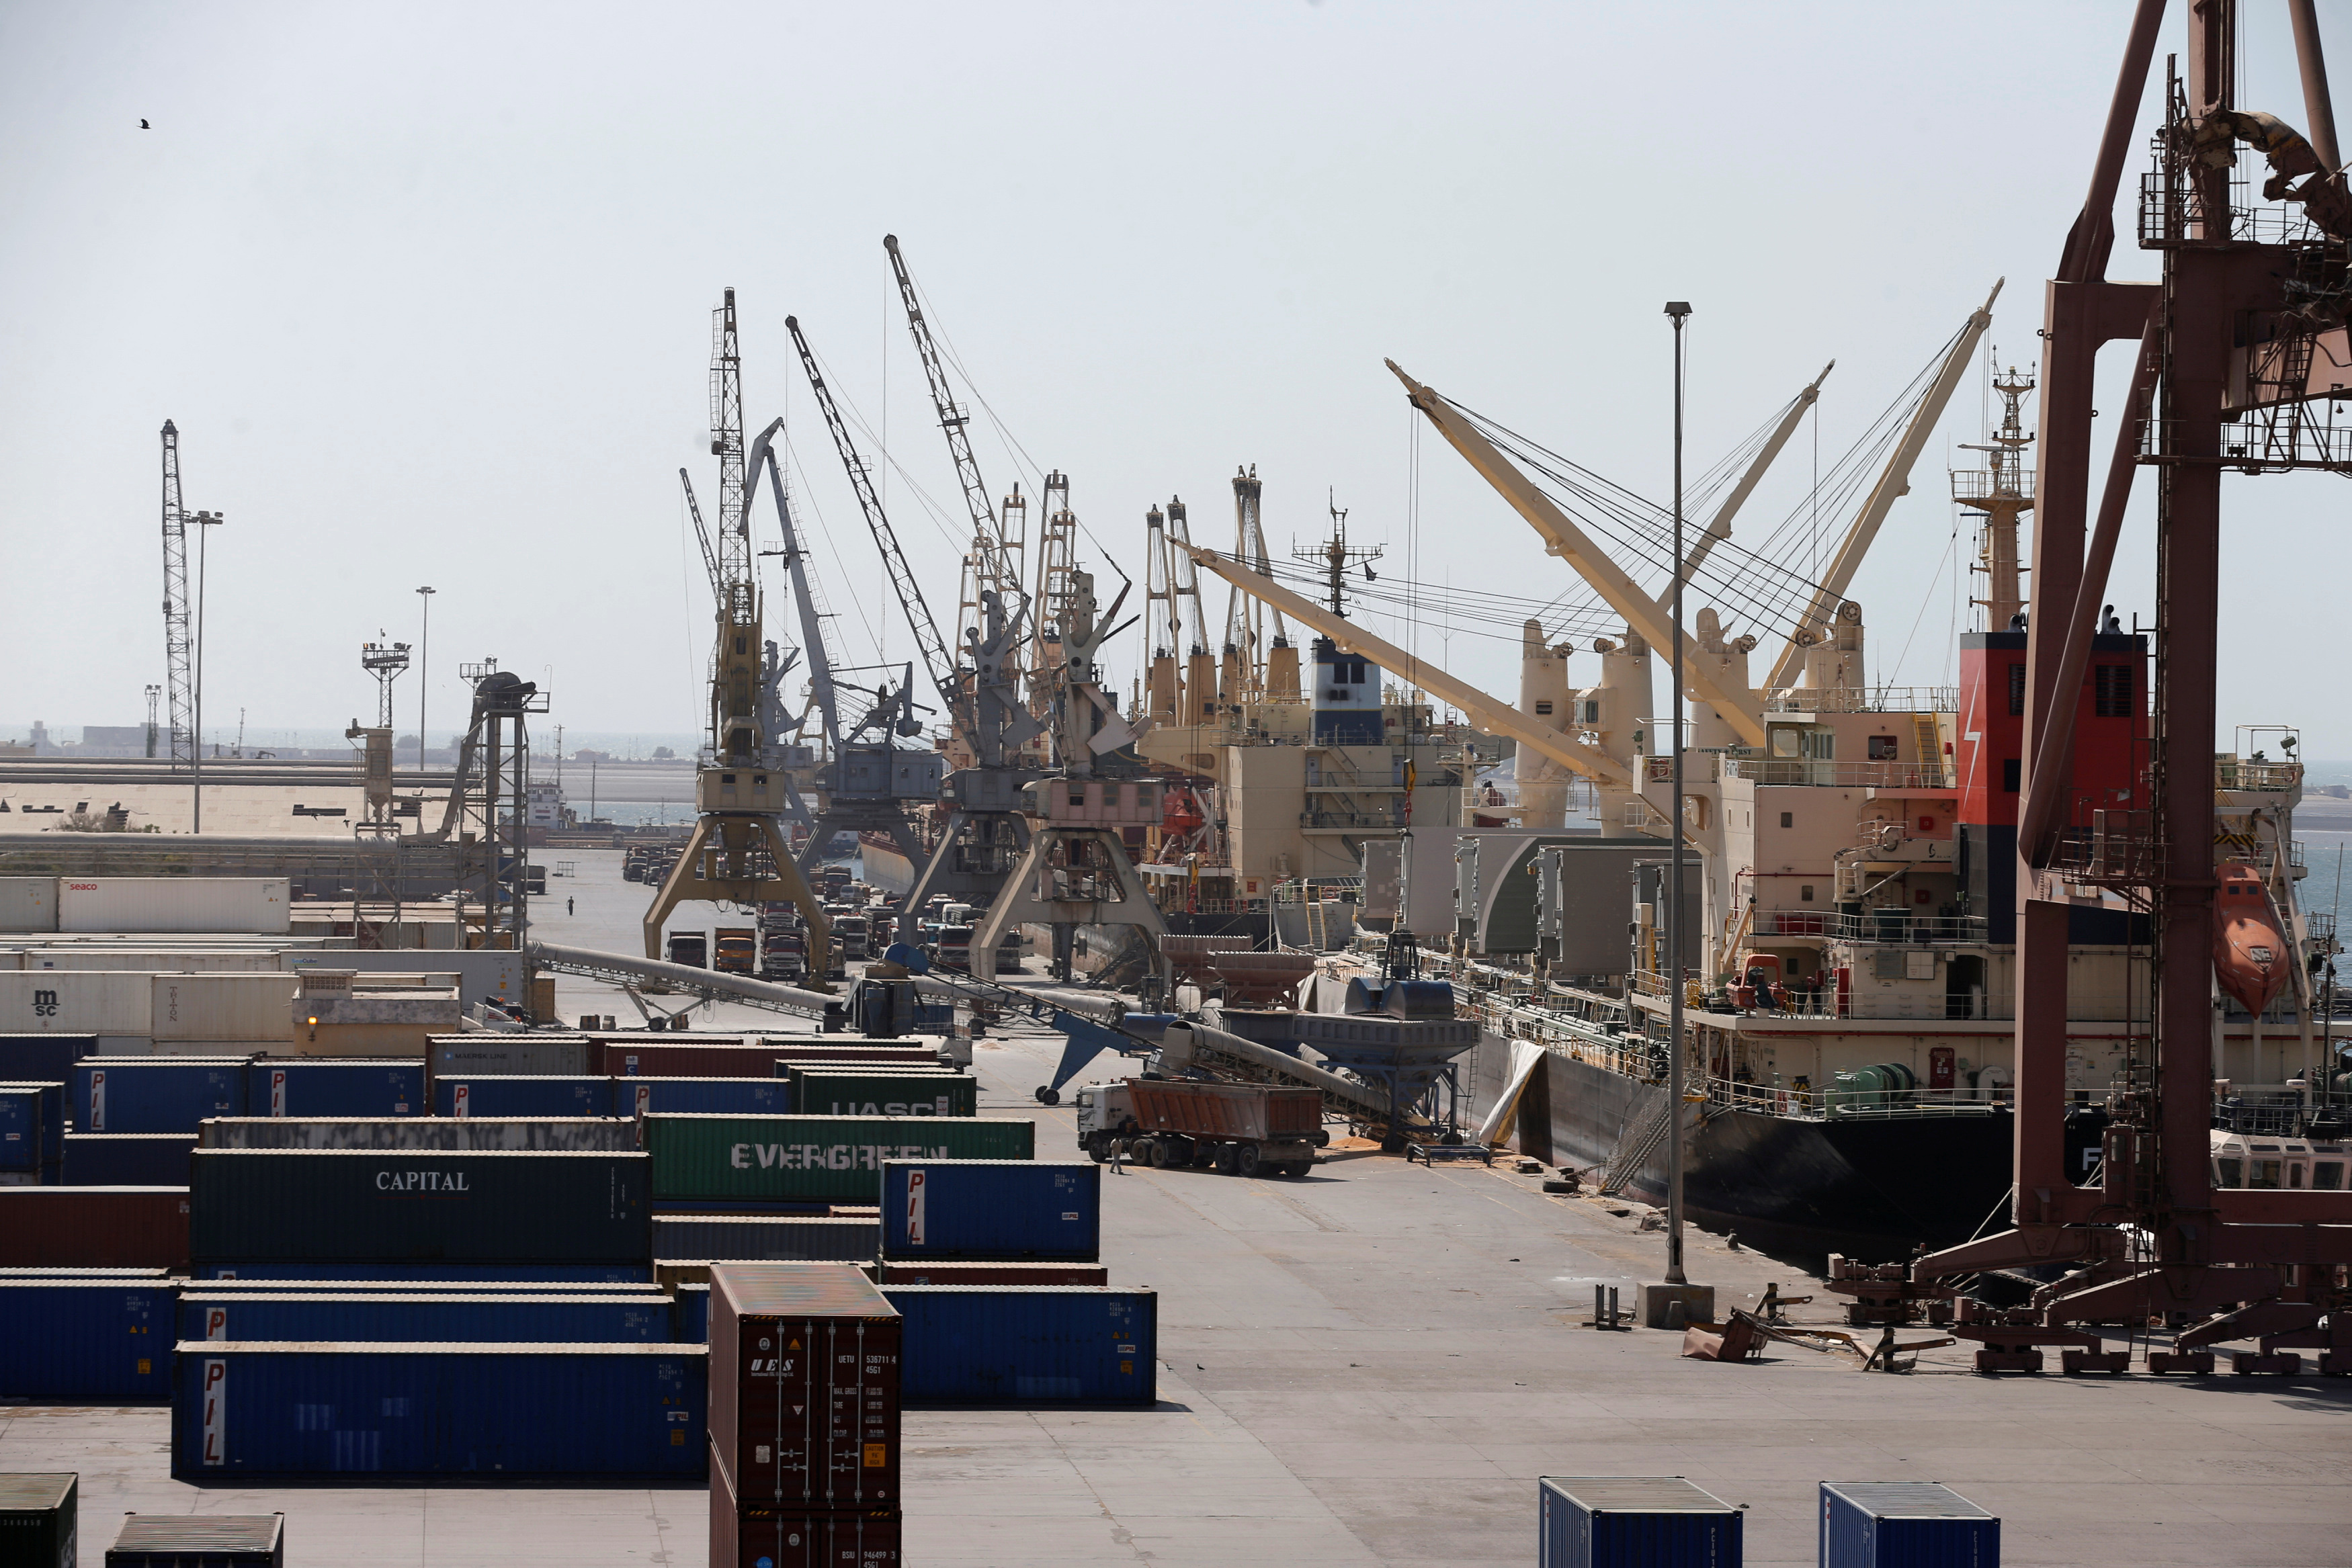 Houthi Attacks in Red Sea Disrupting Business for Half of UK Exporters | Conflict